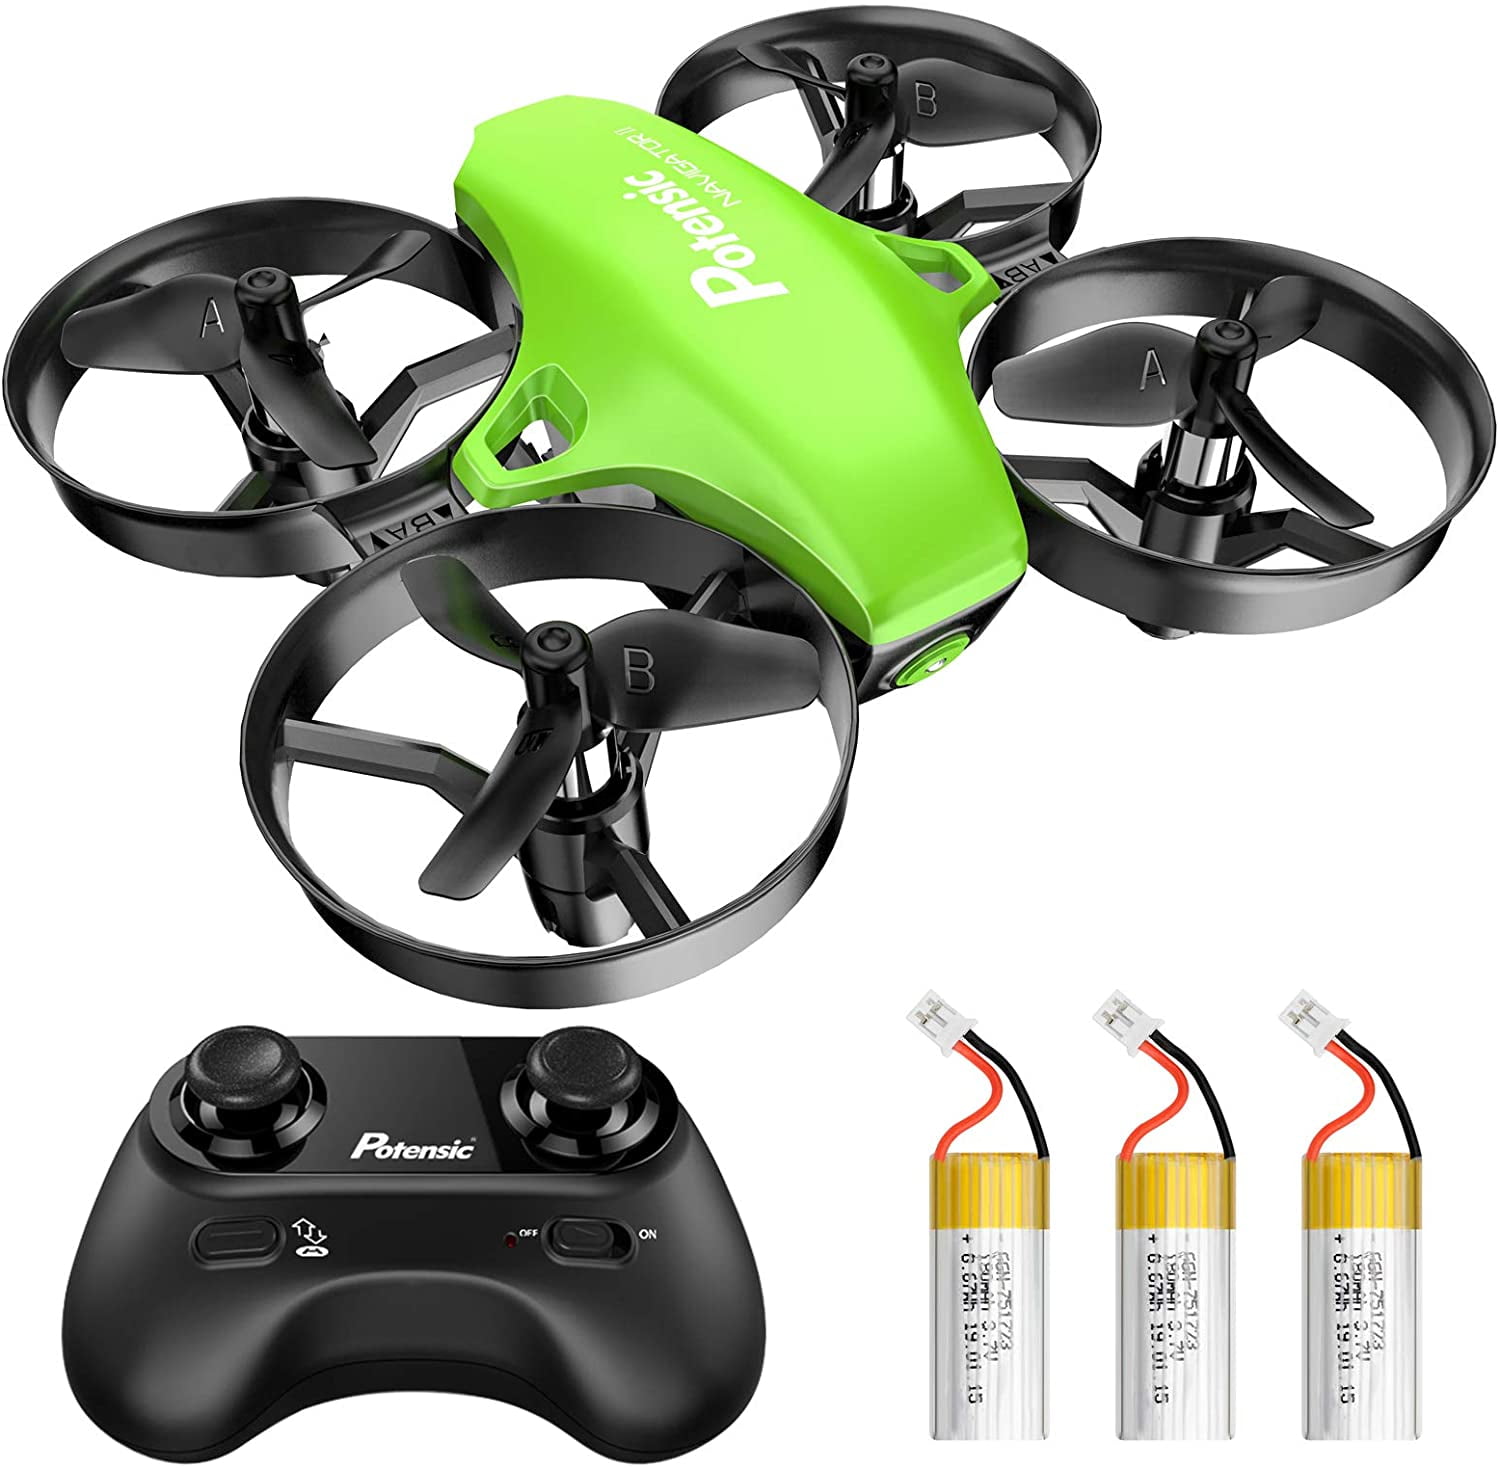 Mini Drone, Potensic A20 Helicopter Quadcopter with Auto Hovering, Headless Mode, One Key Take - Off Landing for Boys Girls, Easy to Fly for Kids and Beginners - Walmart.com